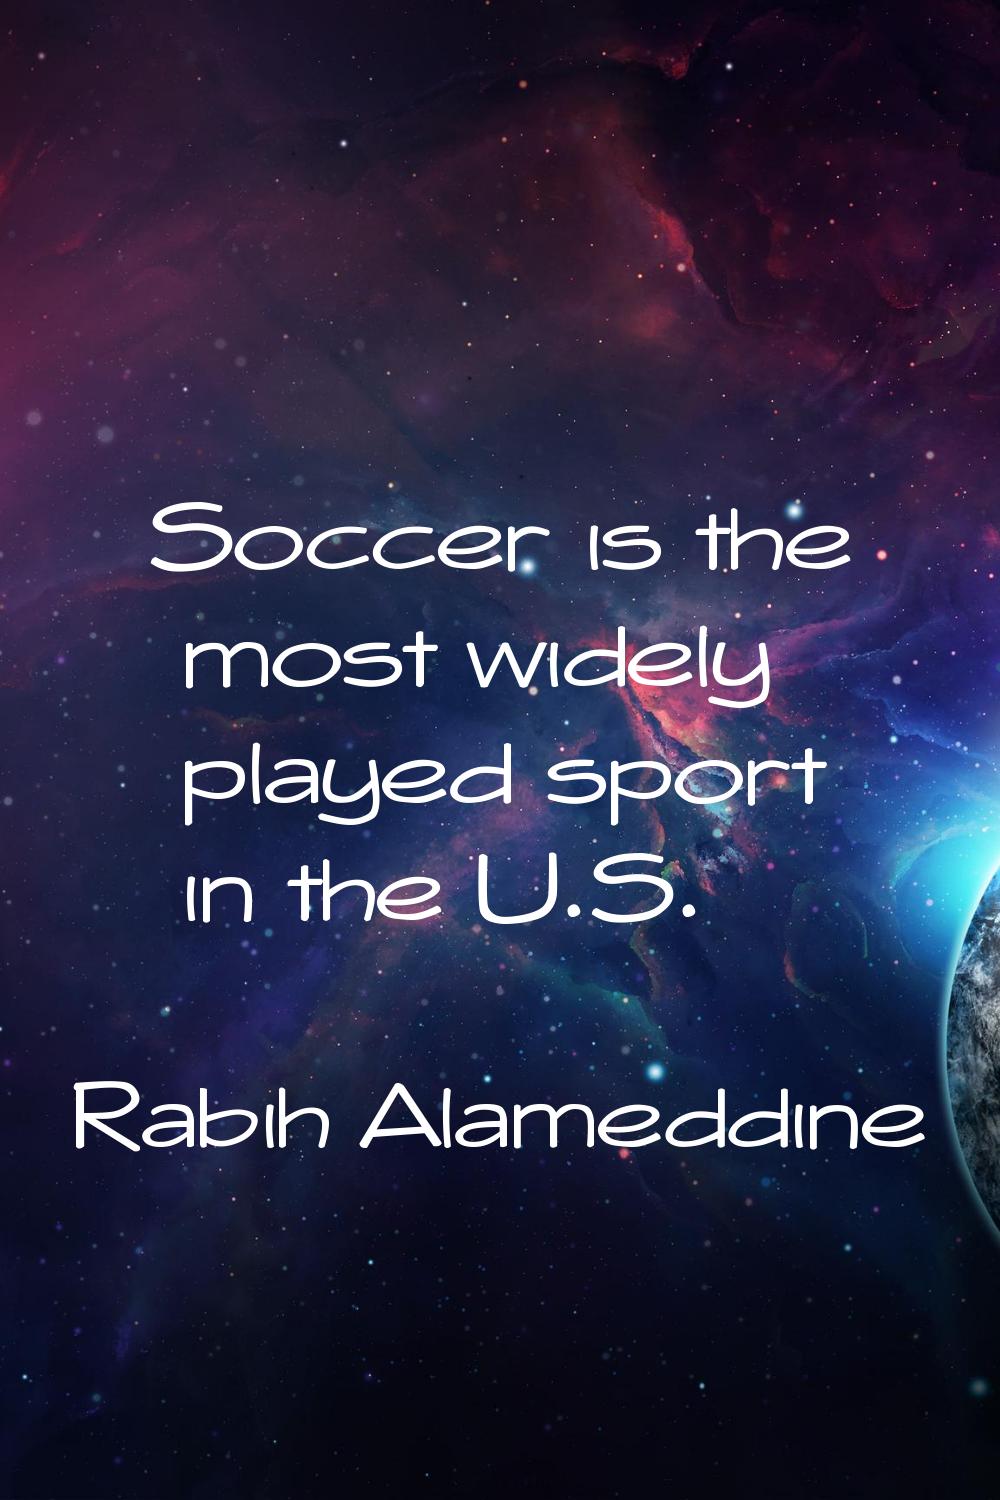 Soccer is the most widely played sport in the U.S.